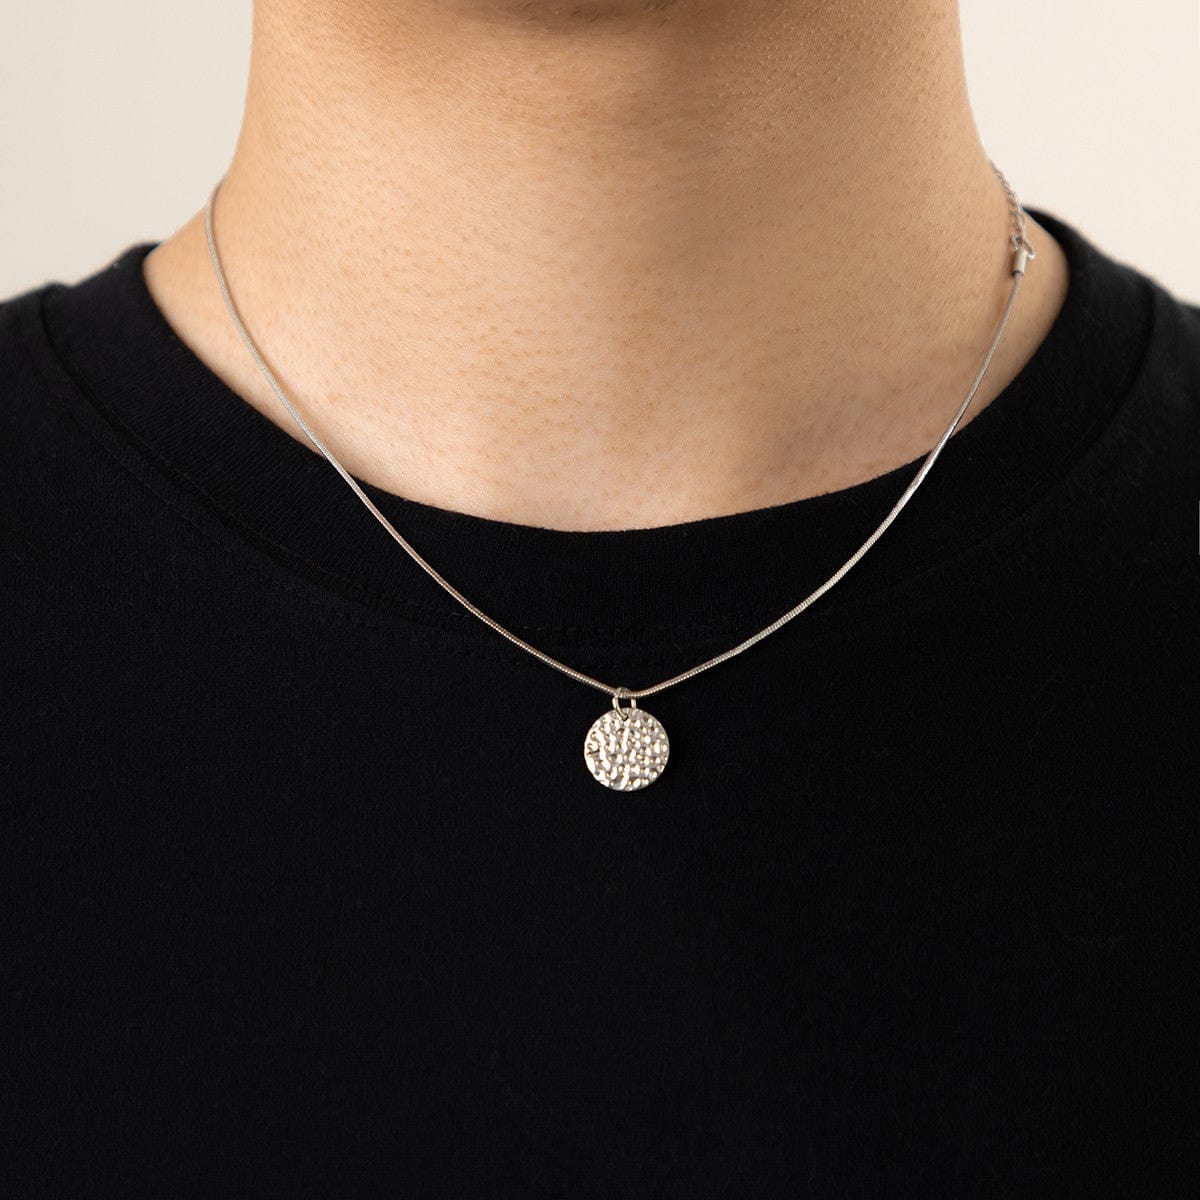 Collier homme pendentif rond